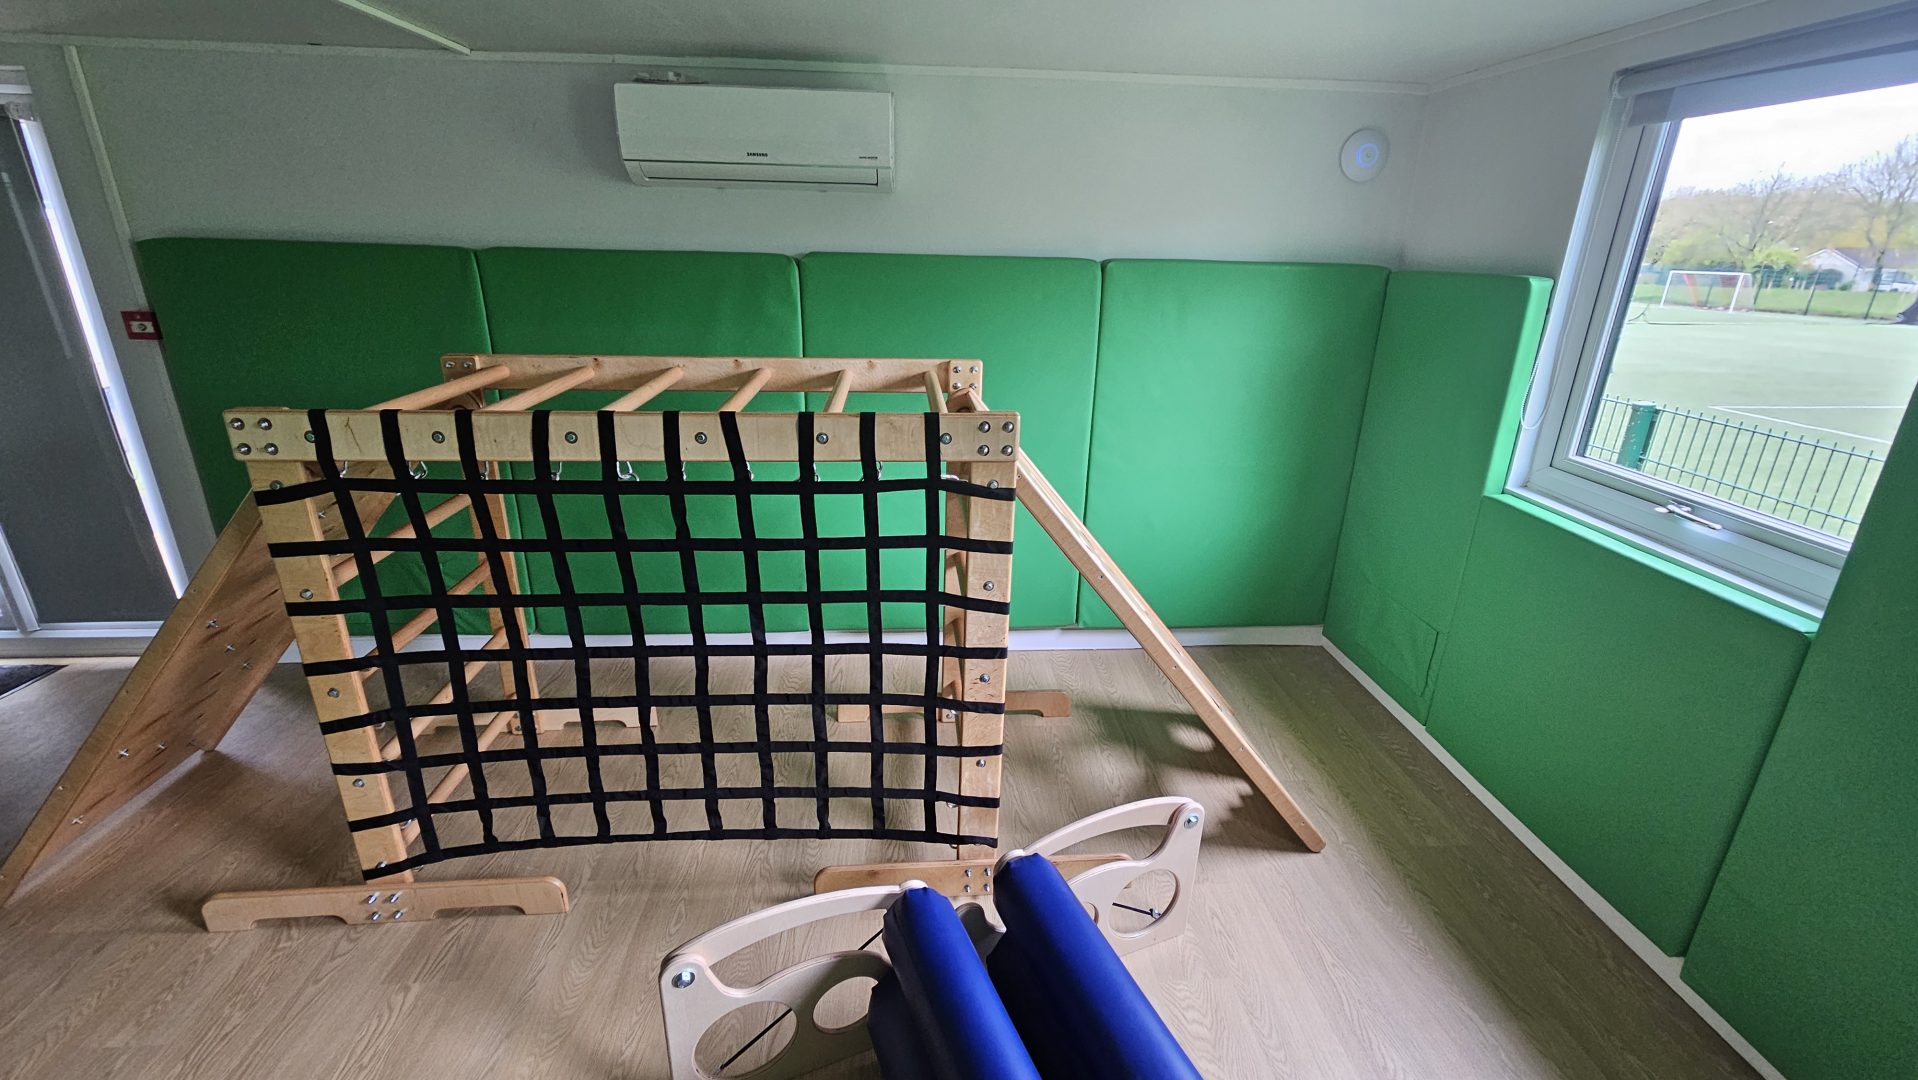 An image of the sensory climbing frame installed into a sensory integration room, the room also has a sensory therapeutic body roller and green soft padded walls. The room has a window providing natural light into the room